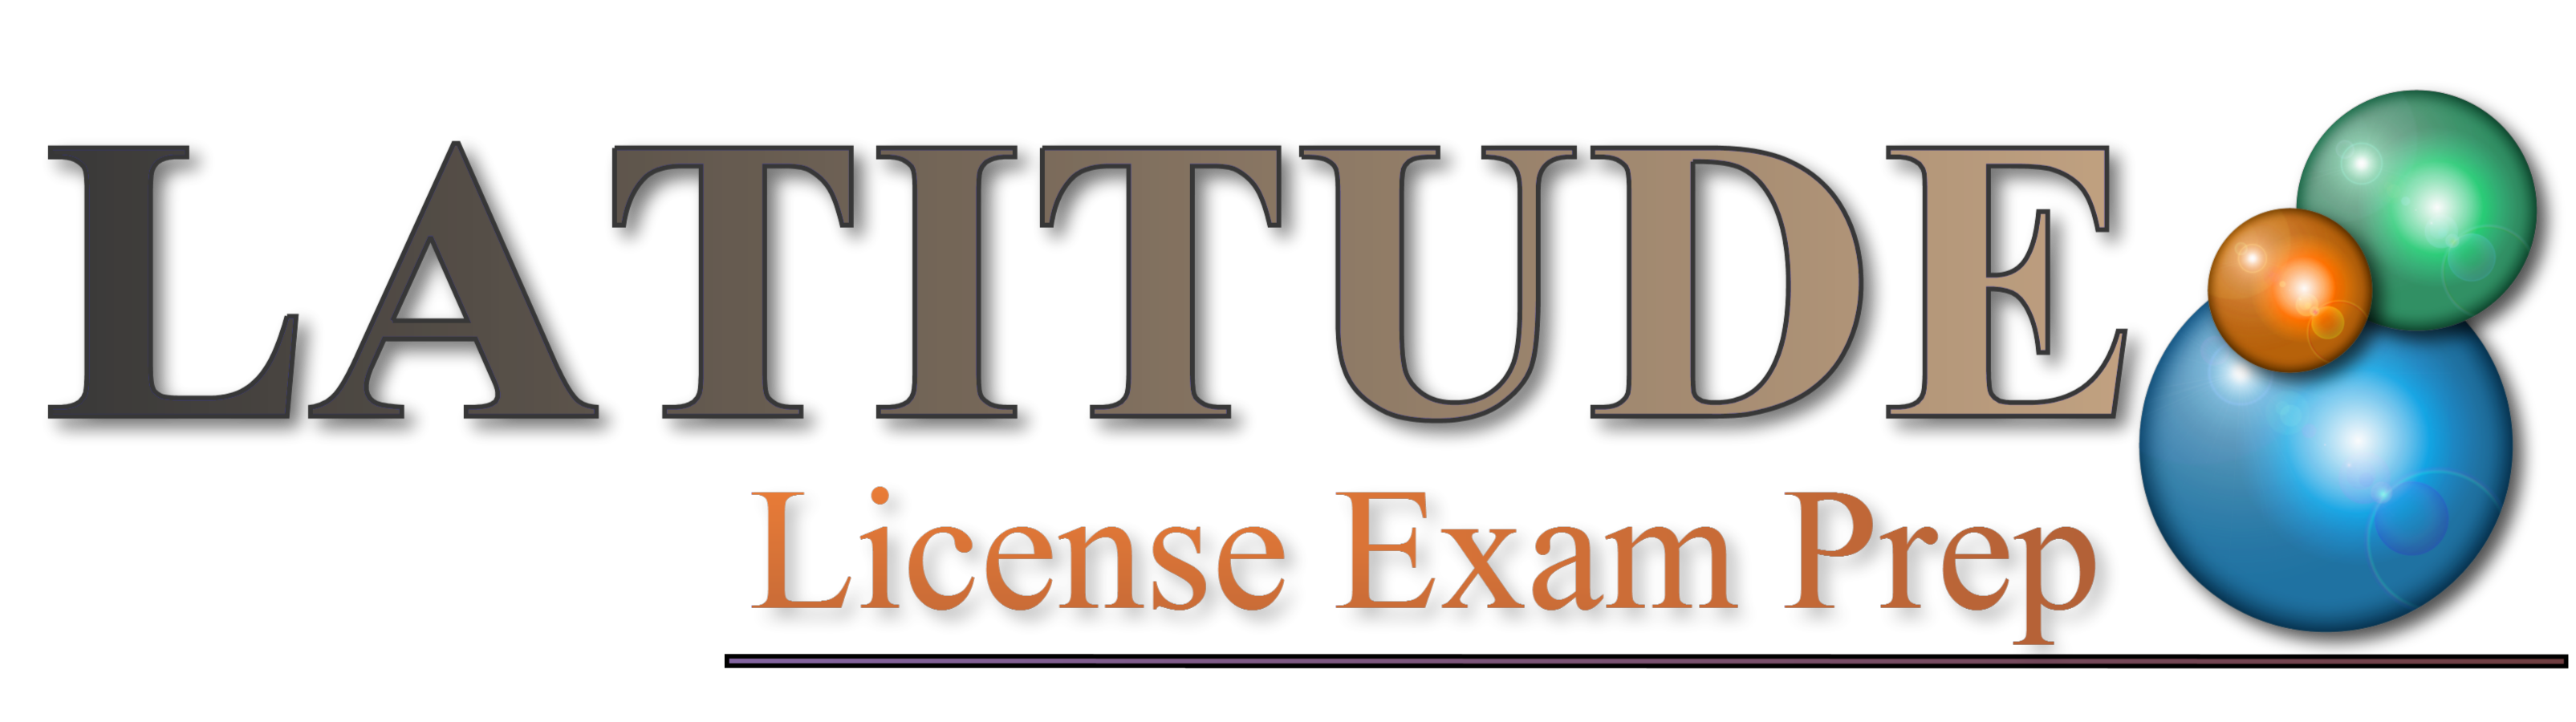 Insurance License Practice Exams and Sample Questions